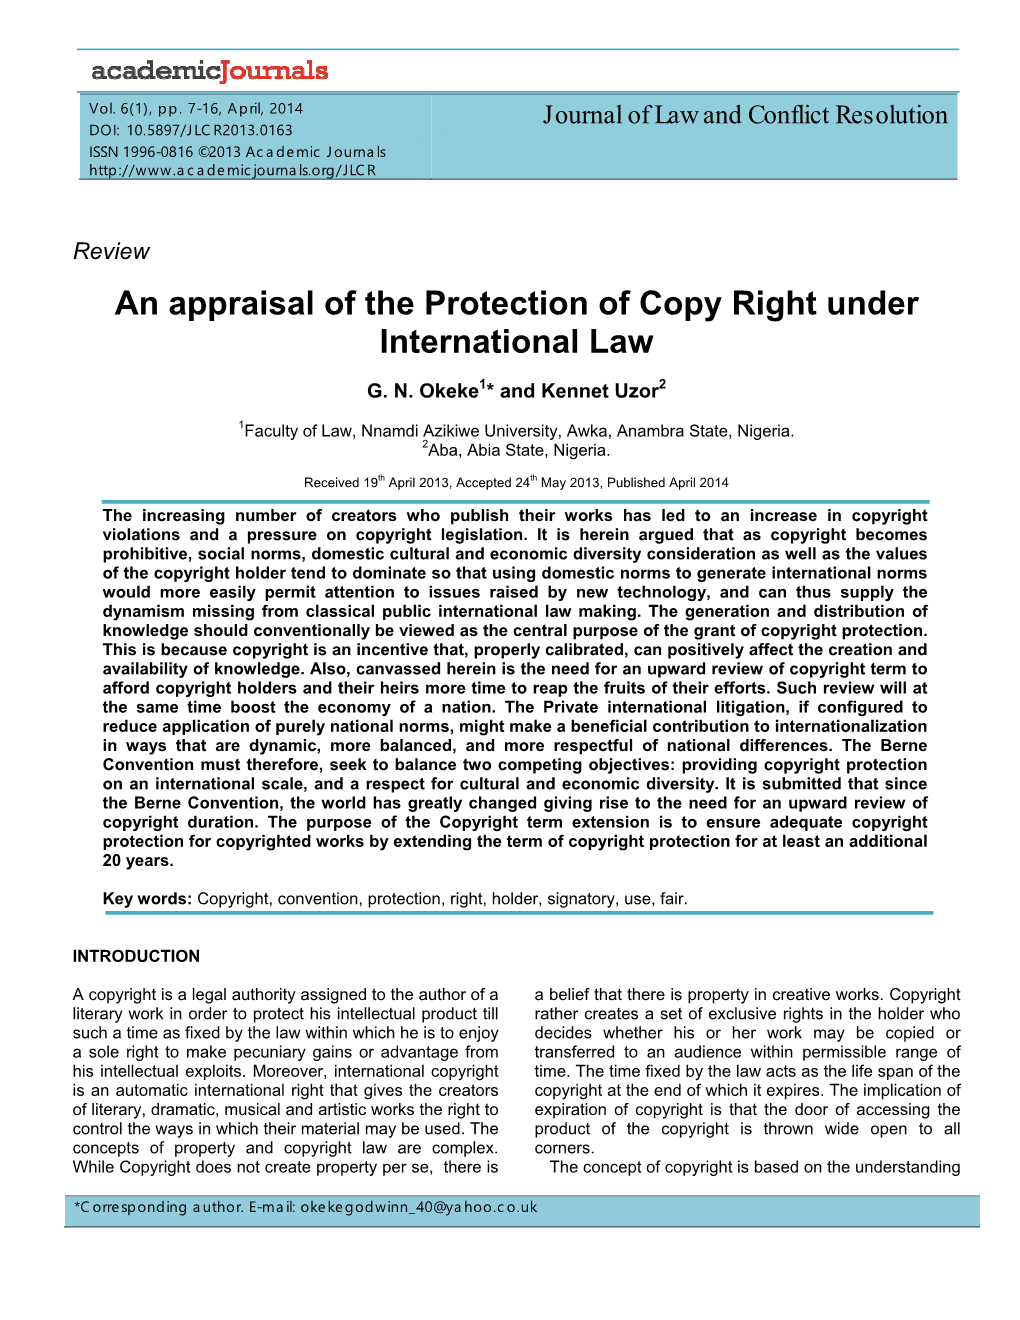 An Appraisal of the Protection of Copy Right Under International Law